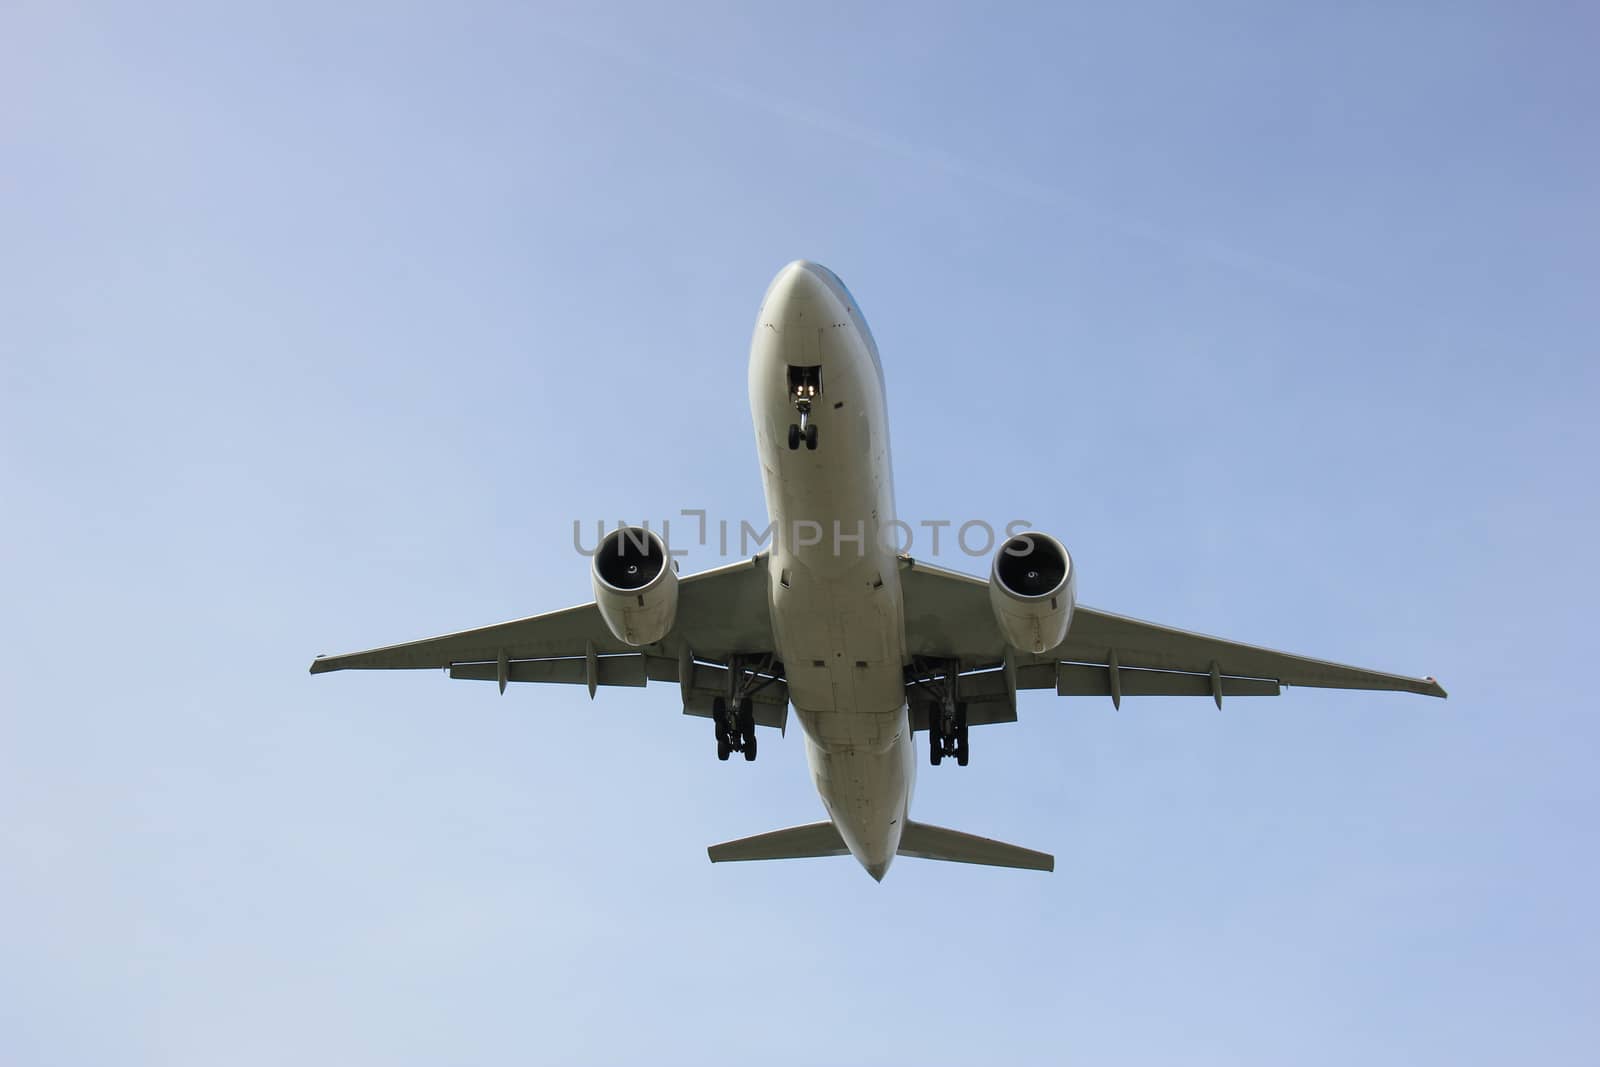 Commercial airplane approaching the runway